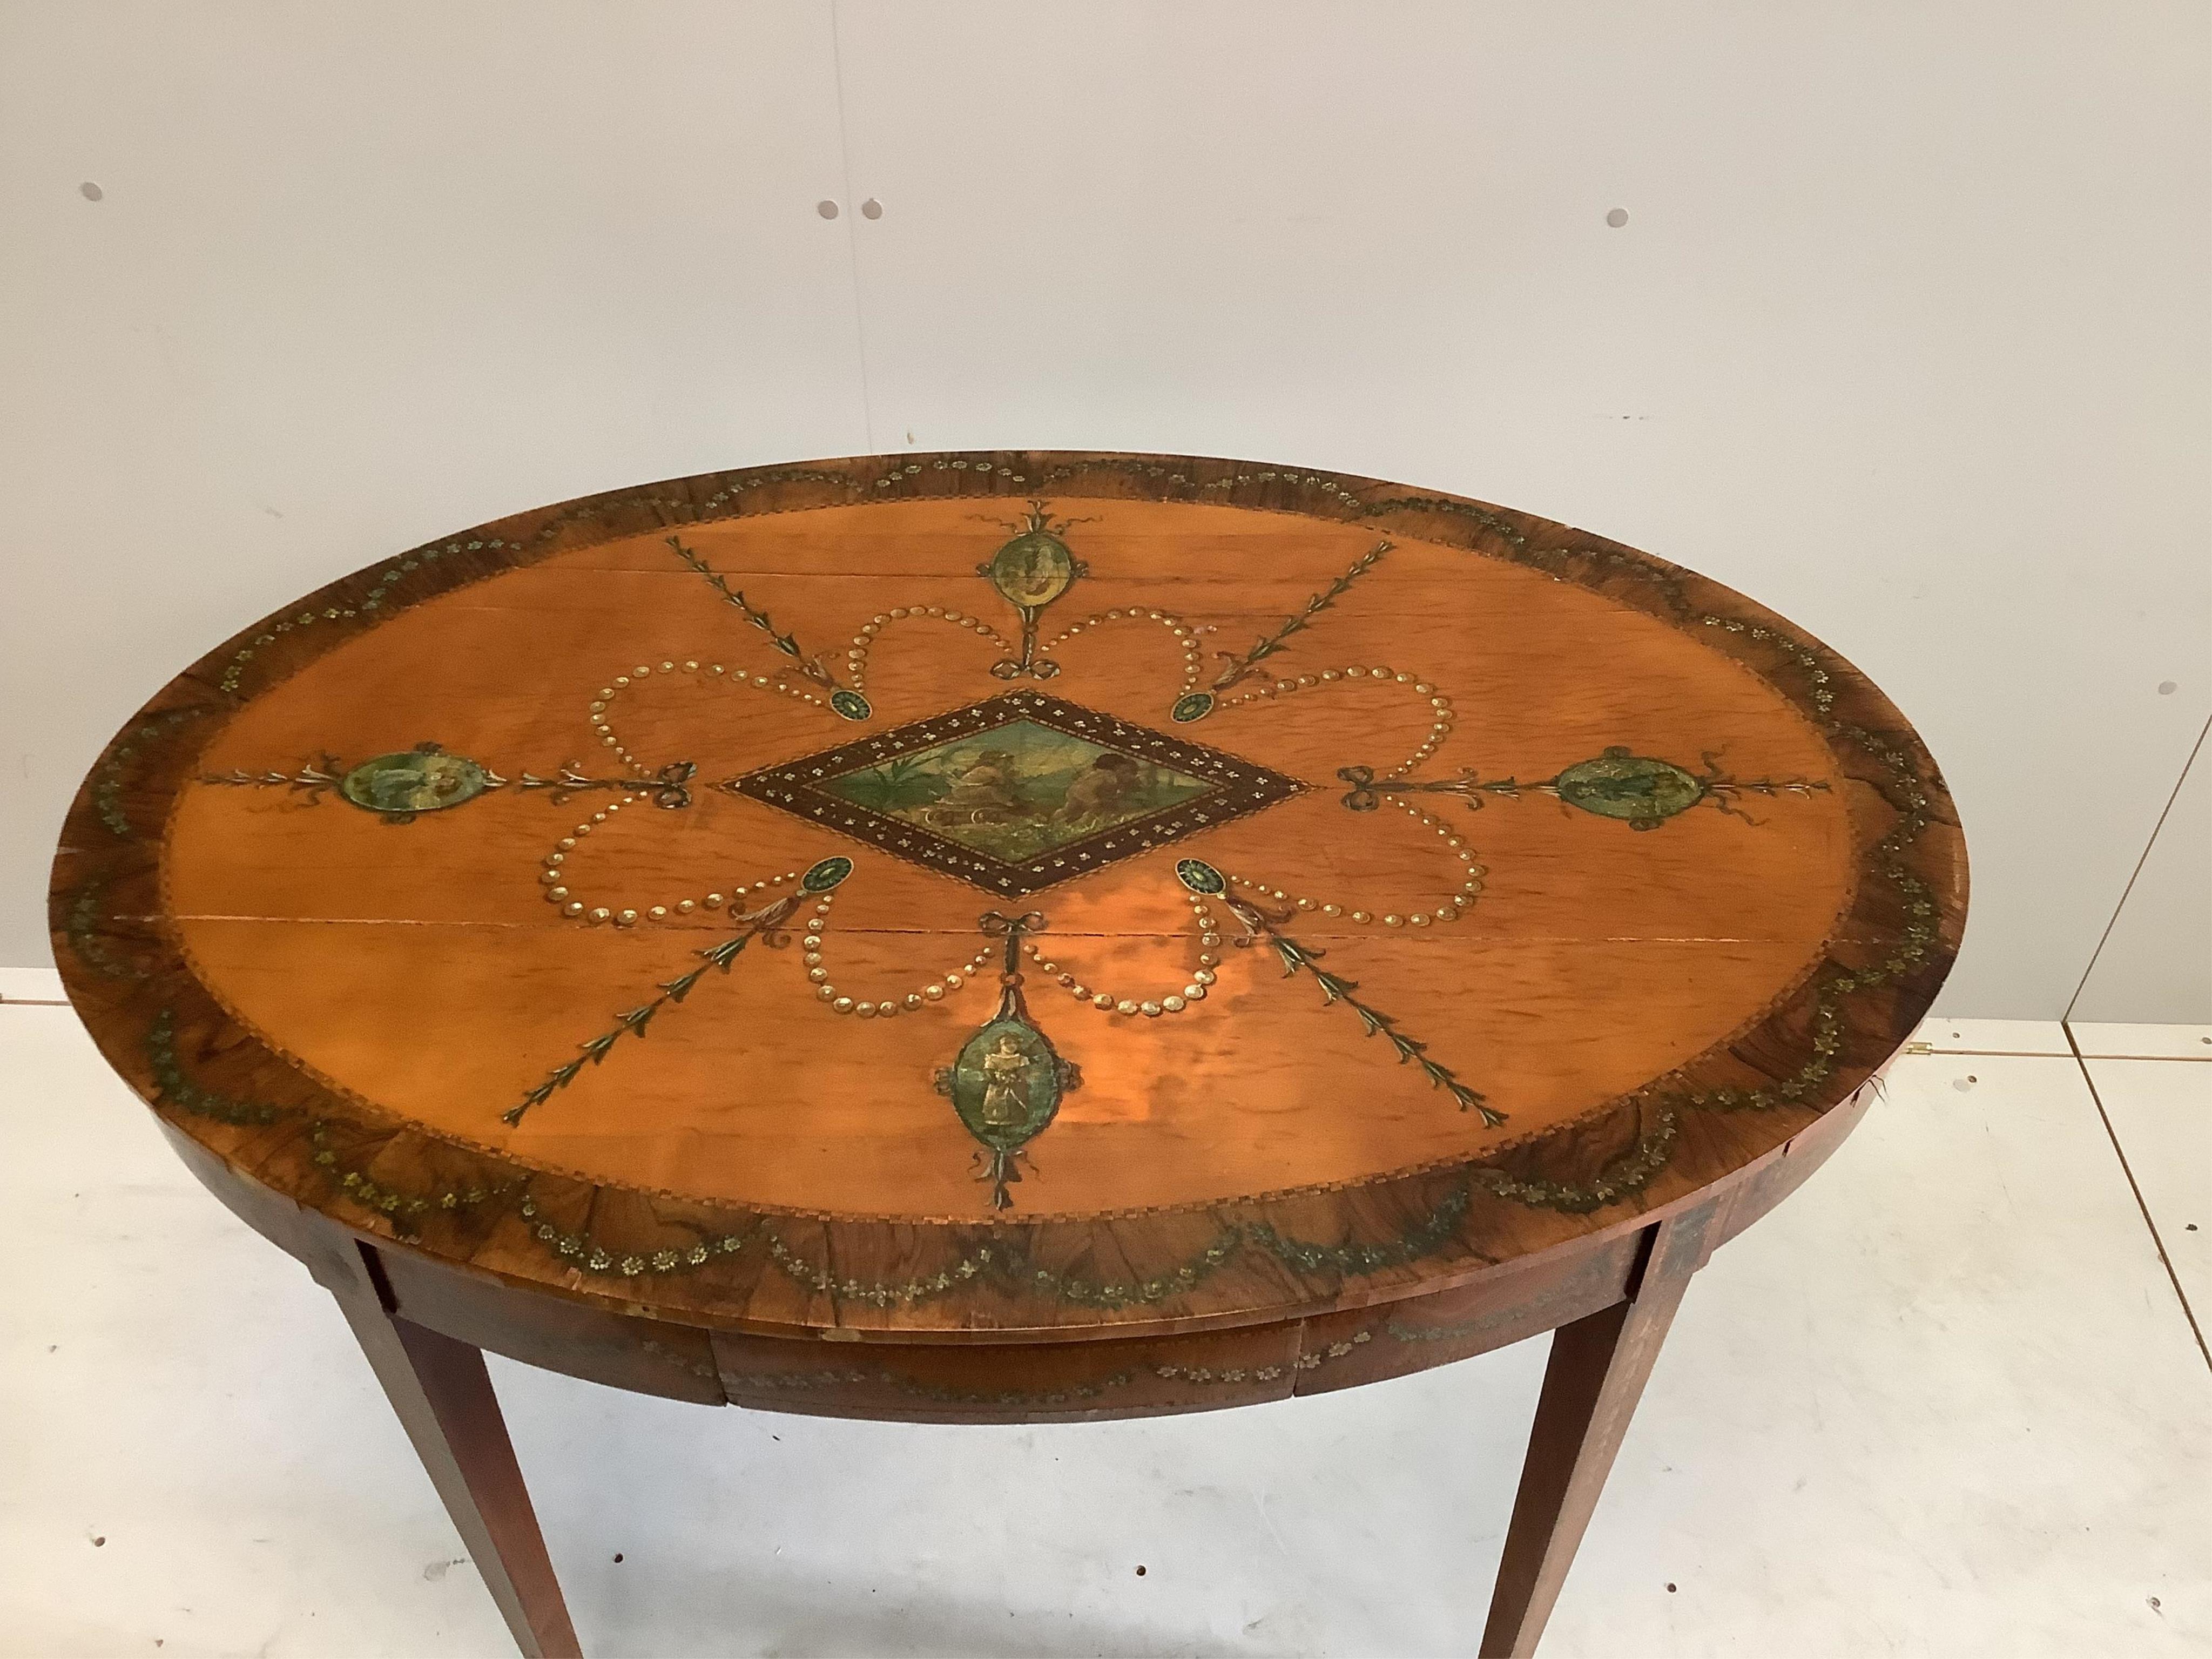 An Edwardian Sheraton revival painted satinwood oval centre table, width 117cm, depth 80cm, height 74cm. Condition - poor